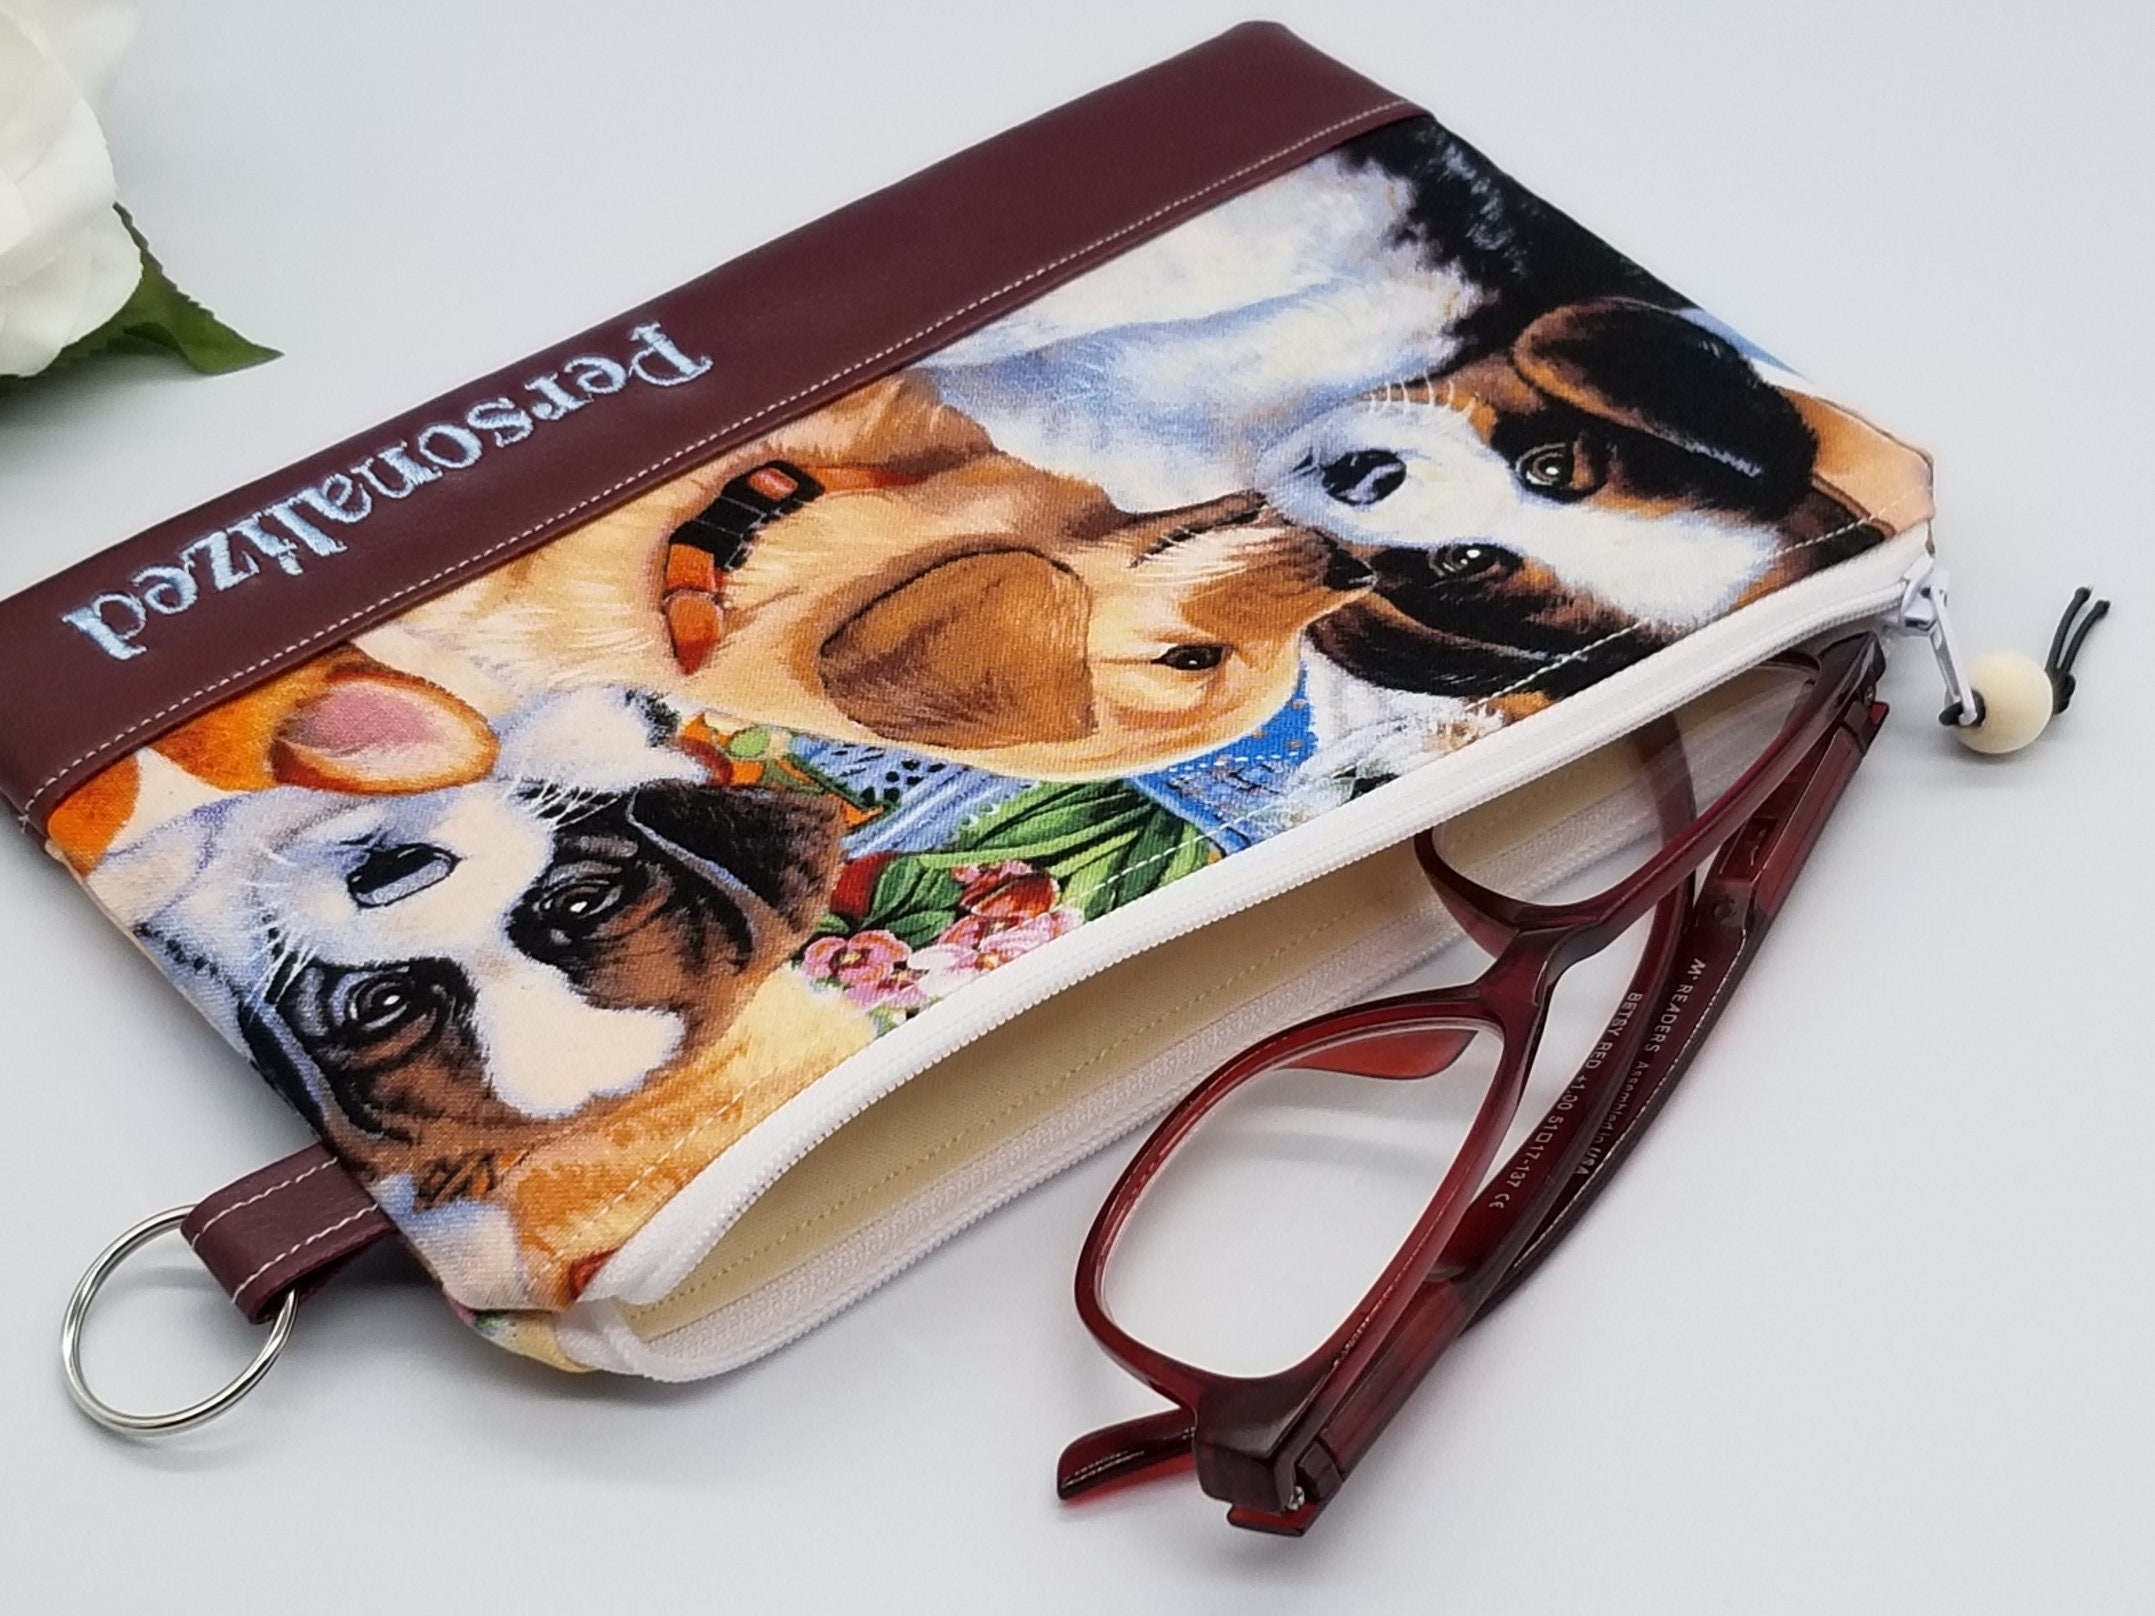  J JOYSAY Custom Pug Husky Dog Colored Pencil Case Personalized  Pencil Holder Stationery Bag with Zipper Large Capacity Customized Storage  Marker Box Stationery for Preppy Stuff : Arts, Crafts & Sewing